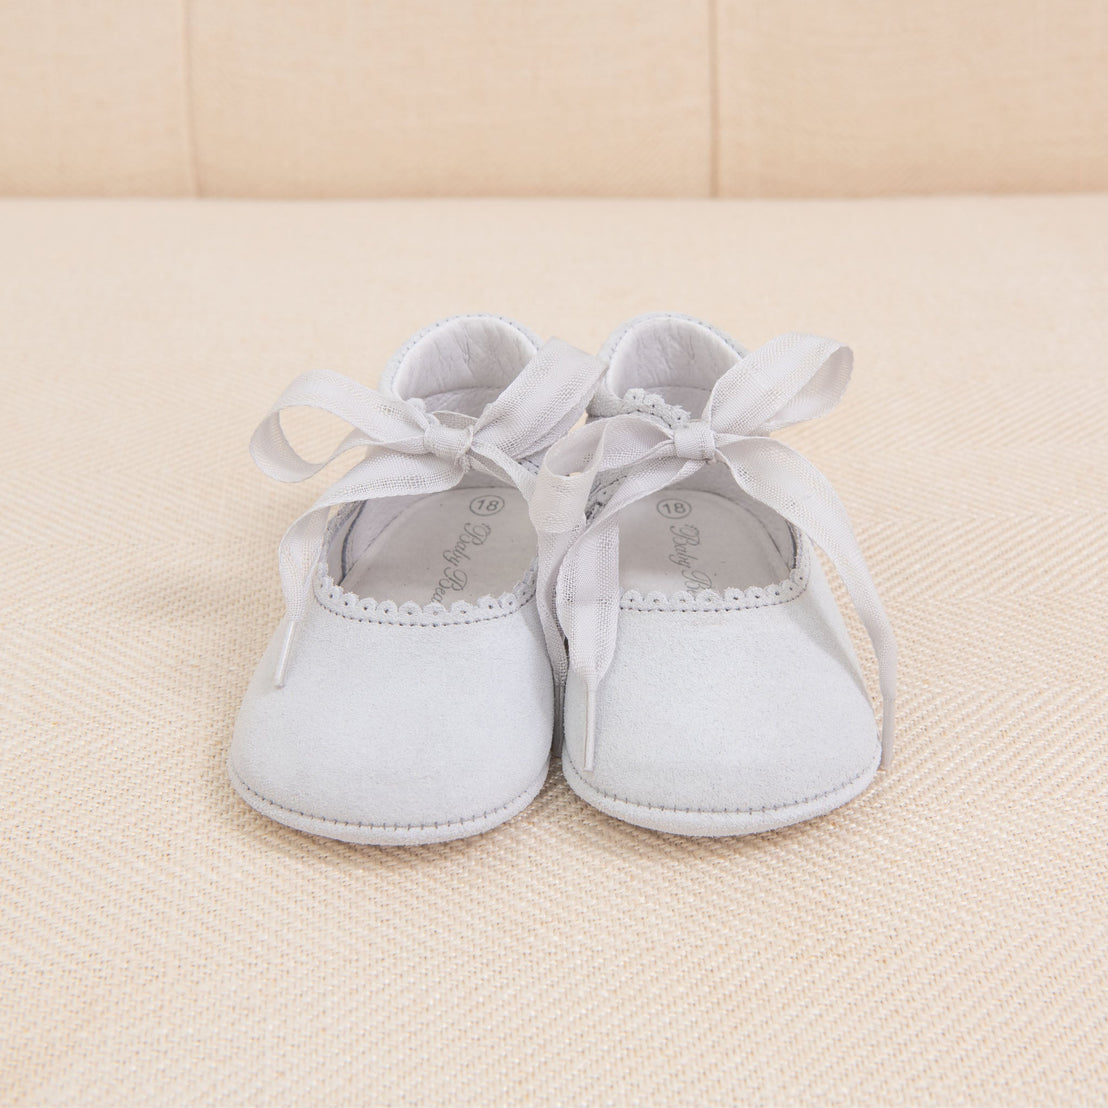 A pair of Thea Suede Tie Mary Janes in light gray with ribbon ties placed on a beige fabric surface.